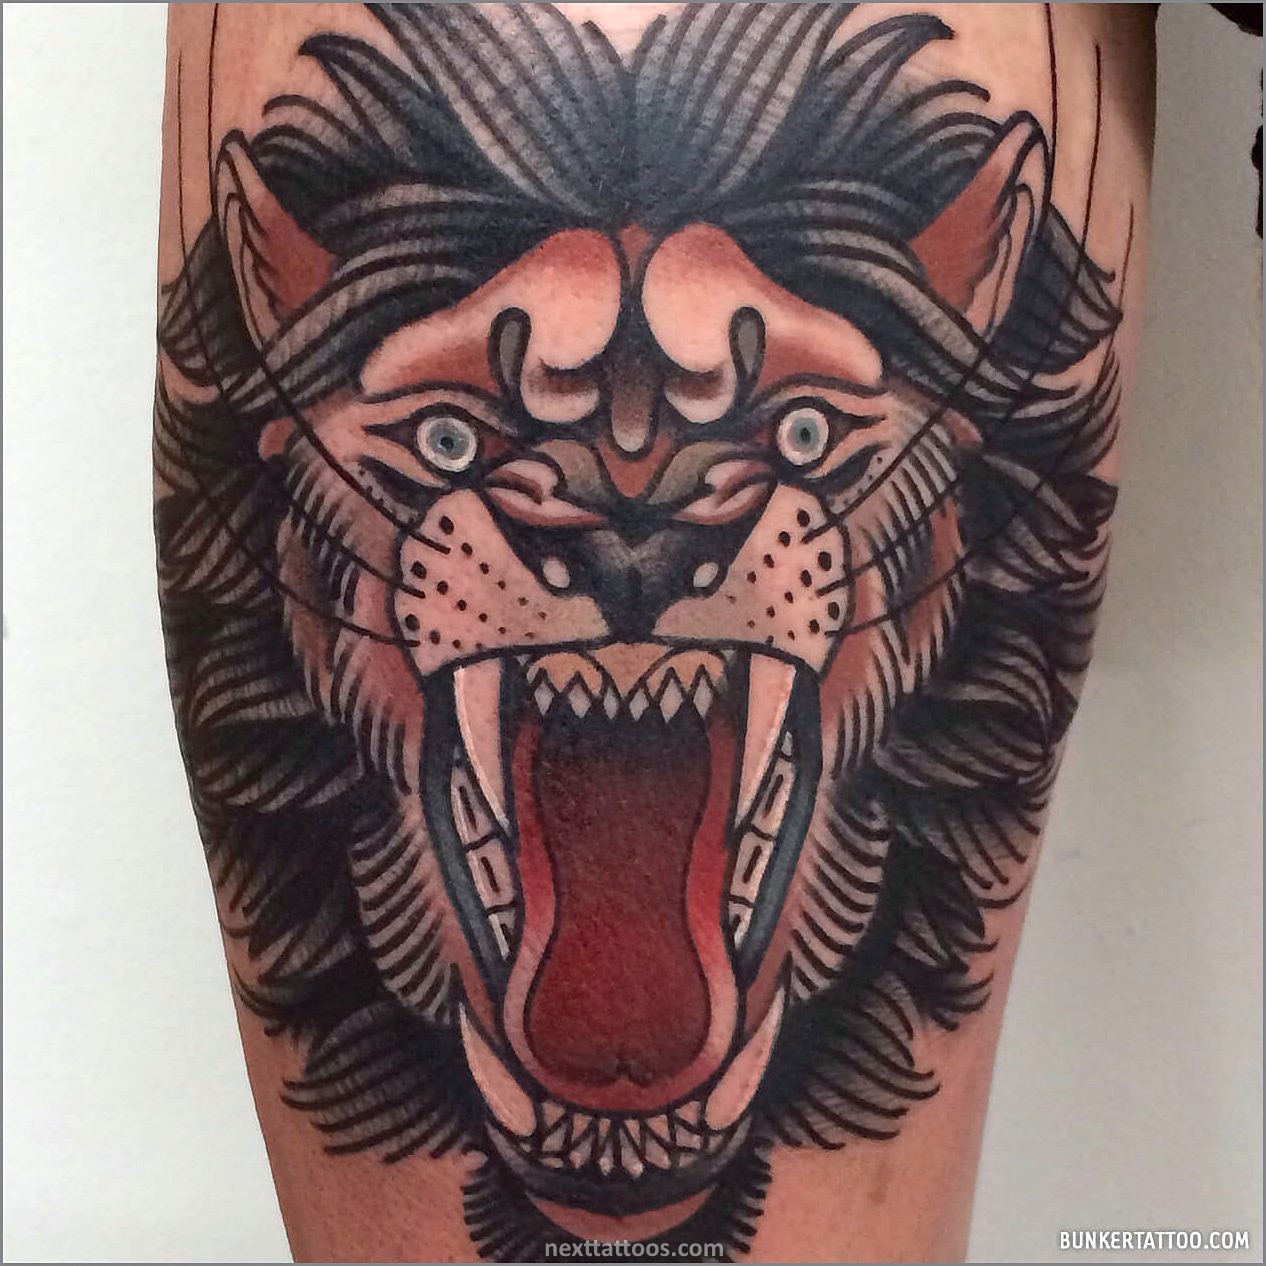 Tiger Tattoos - Discover the Meaning Behind Tiger Tattoos